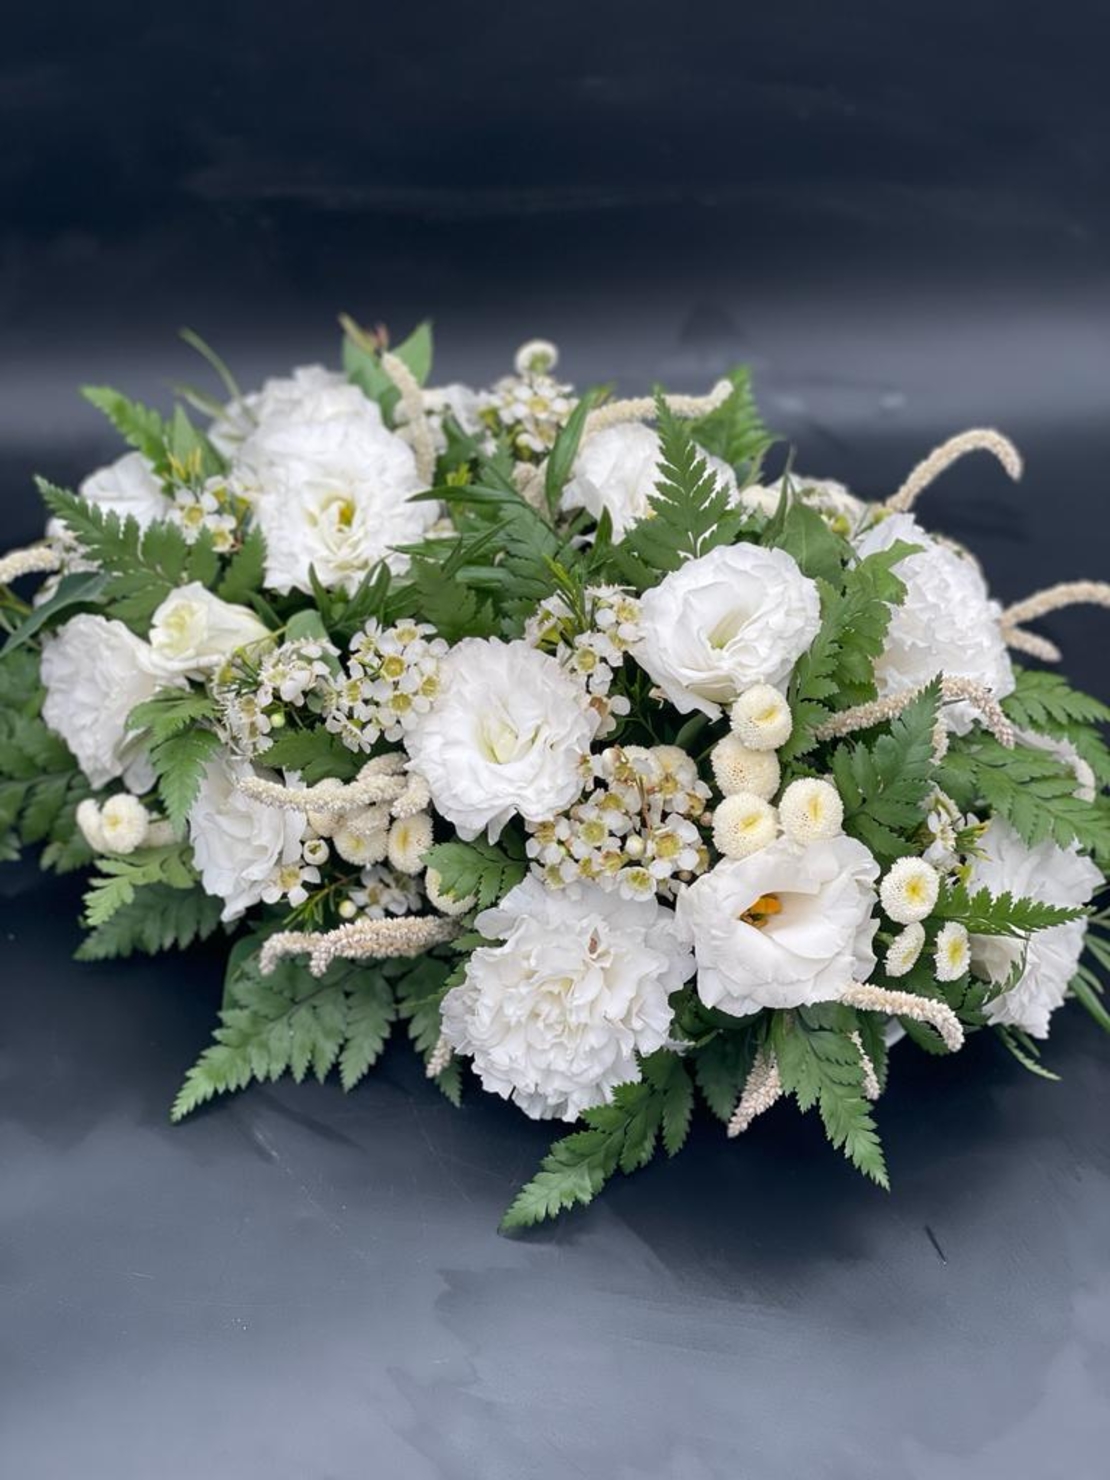 Classic table flowers - White